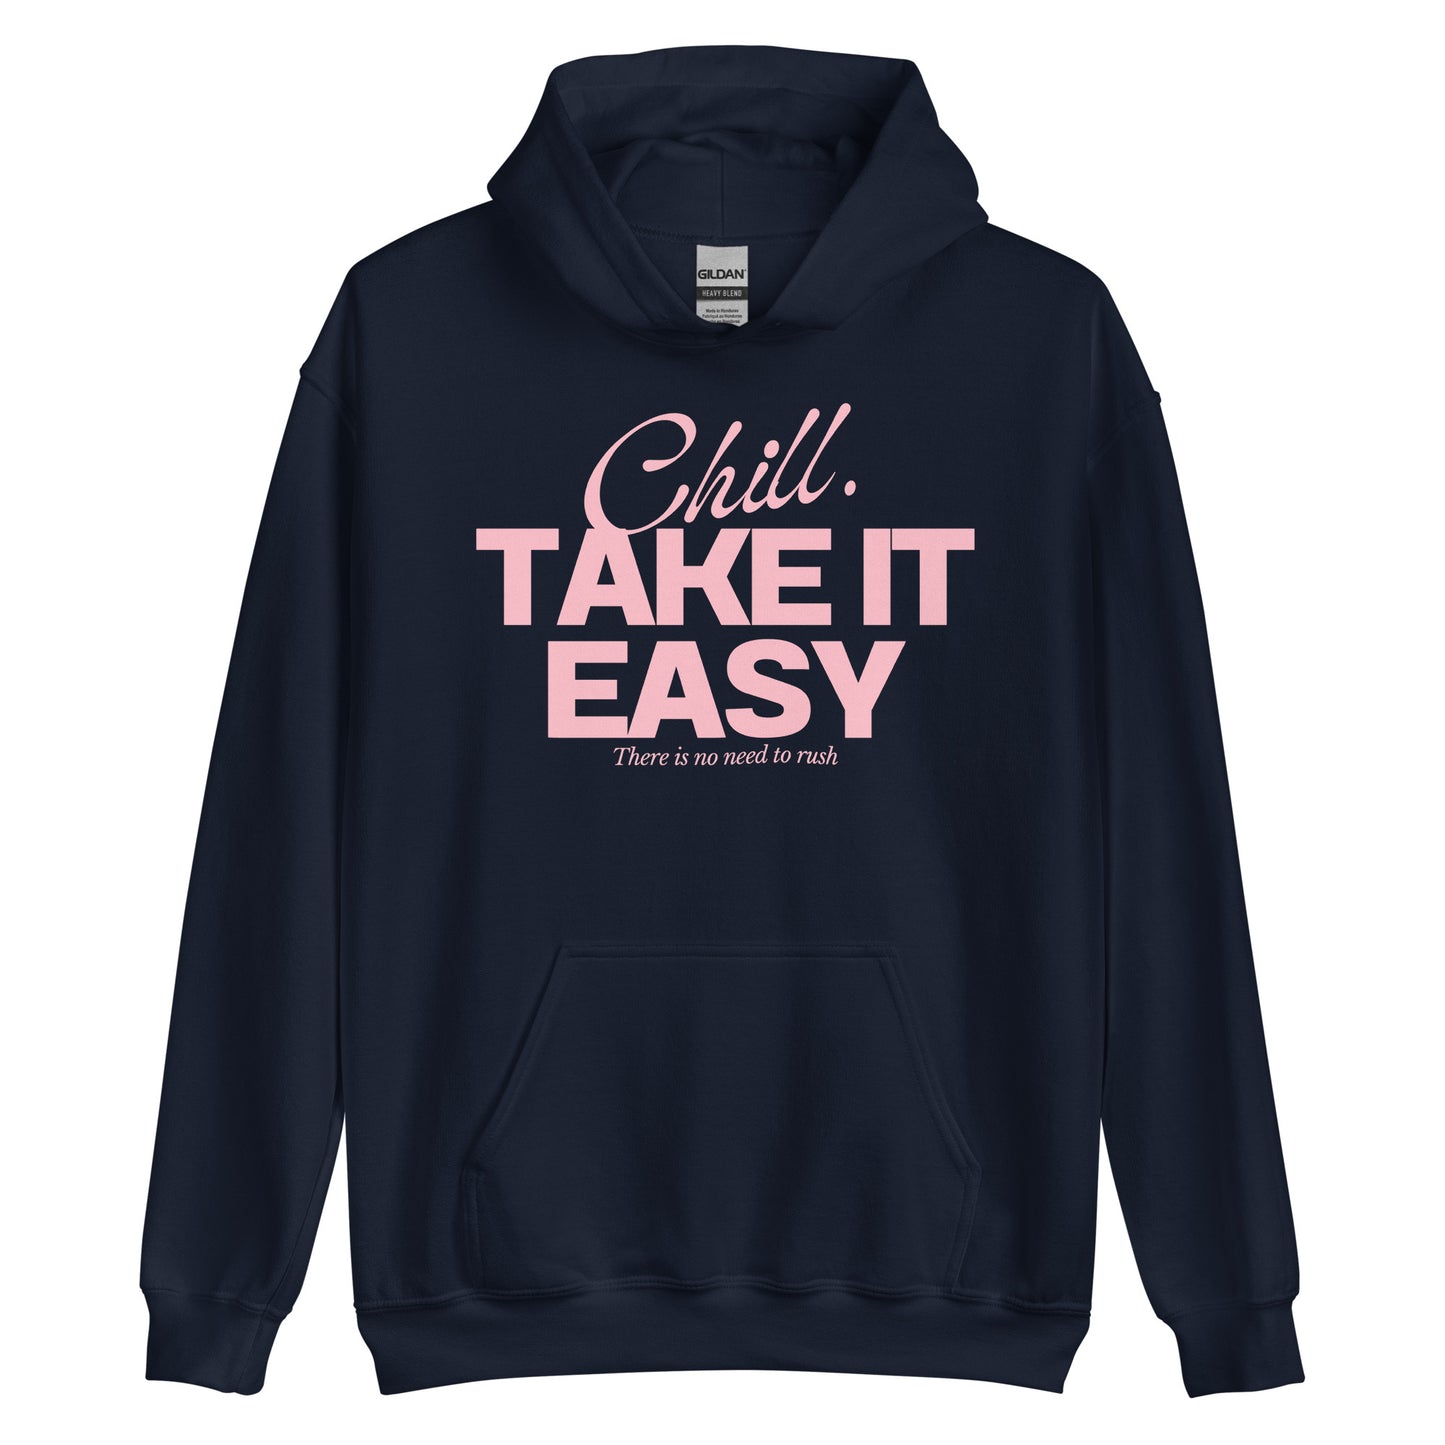 Navy blue hoodie displayed on a plain background, with the motivational message 'Chill. TAKE IT EASY. There is no need to rush' in pink text on the front.